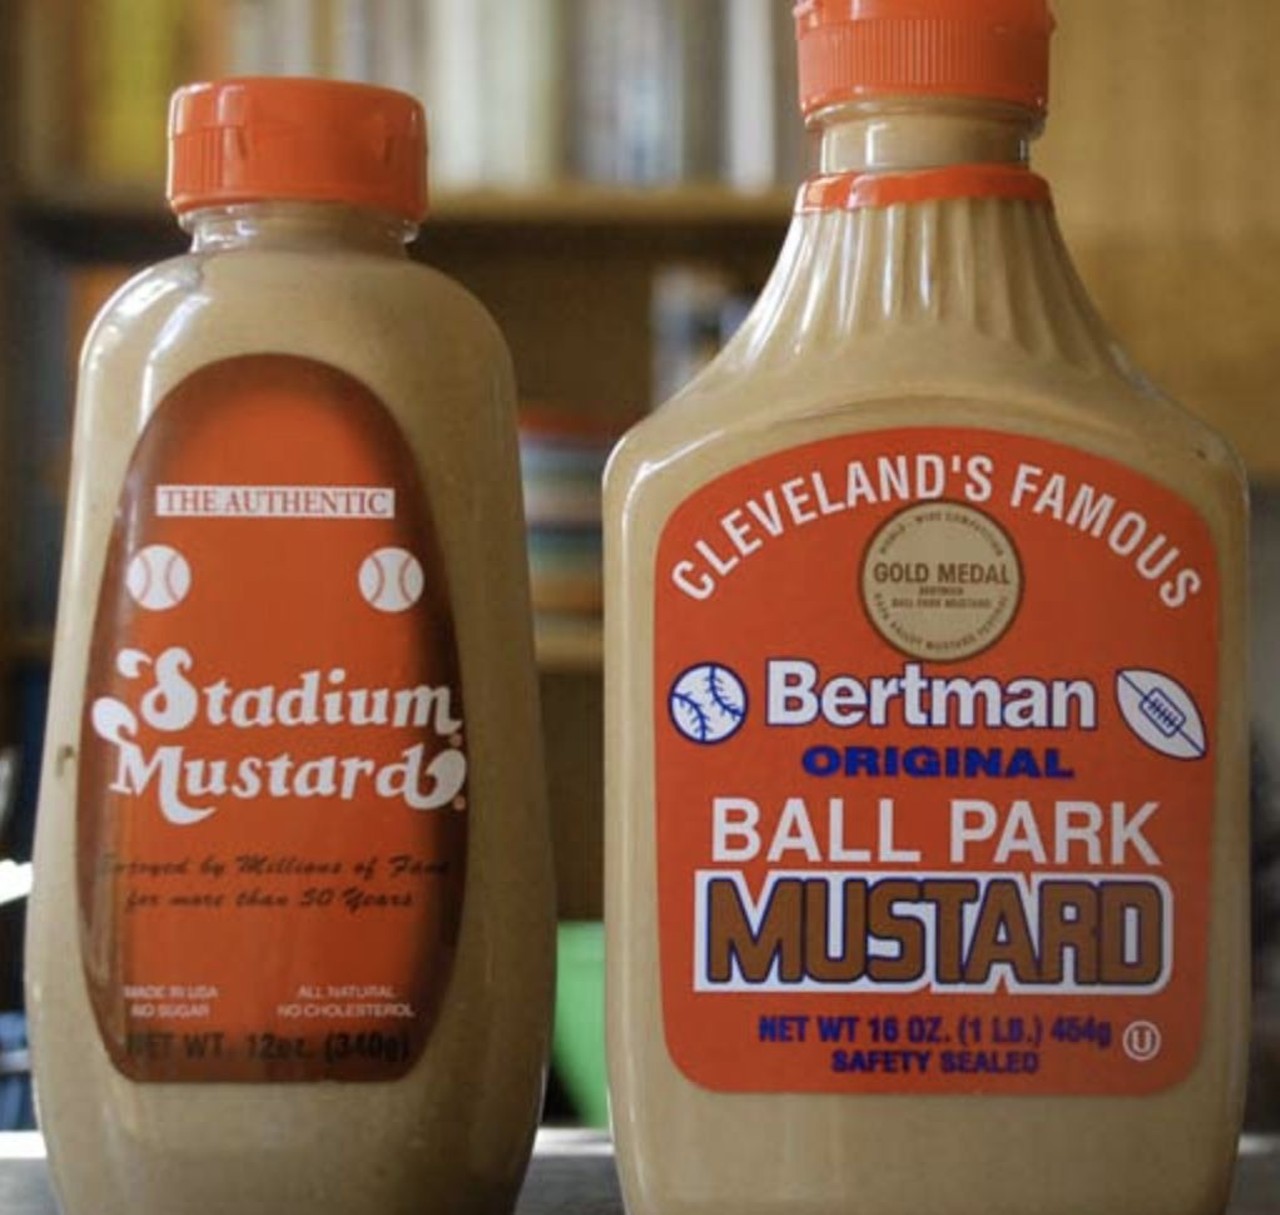 You not only order stadium mustard, but have an opinion on which stadium mustard is better